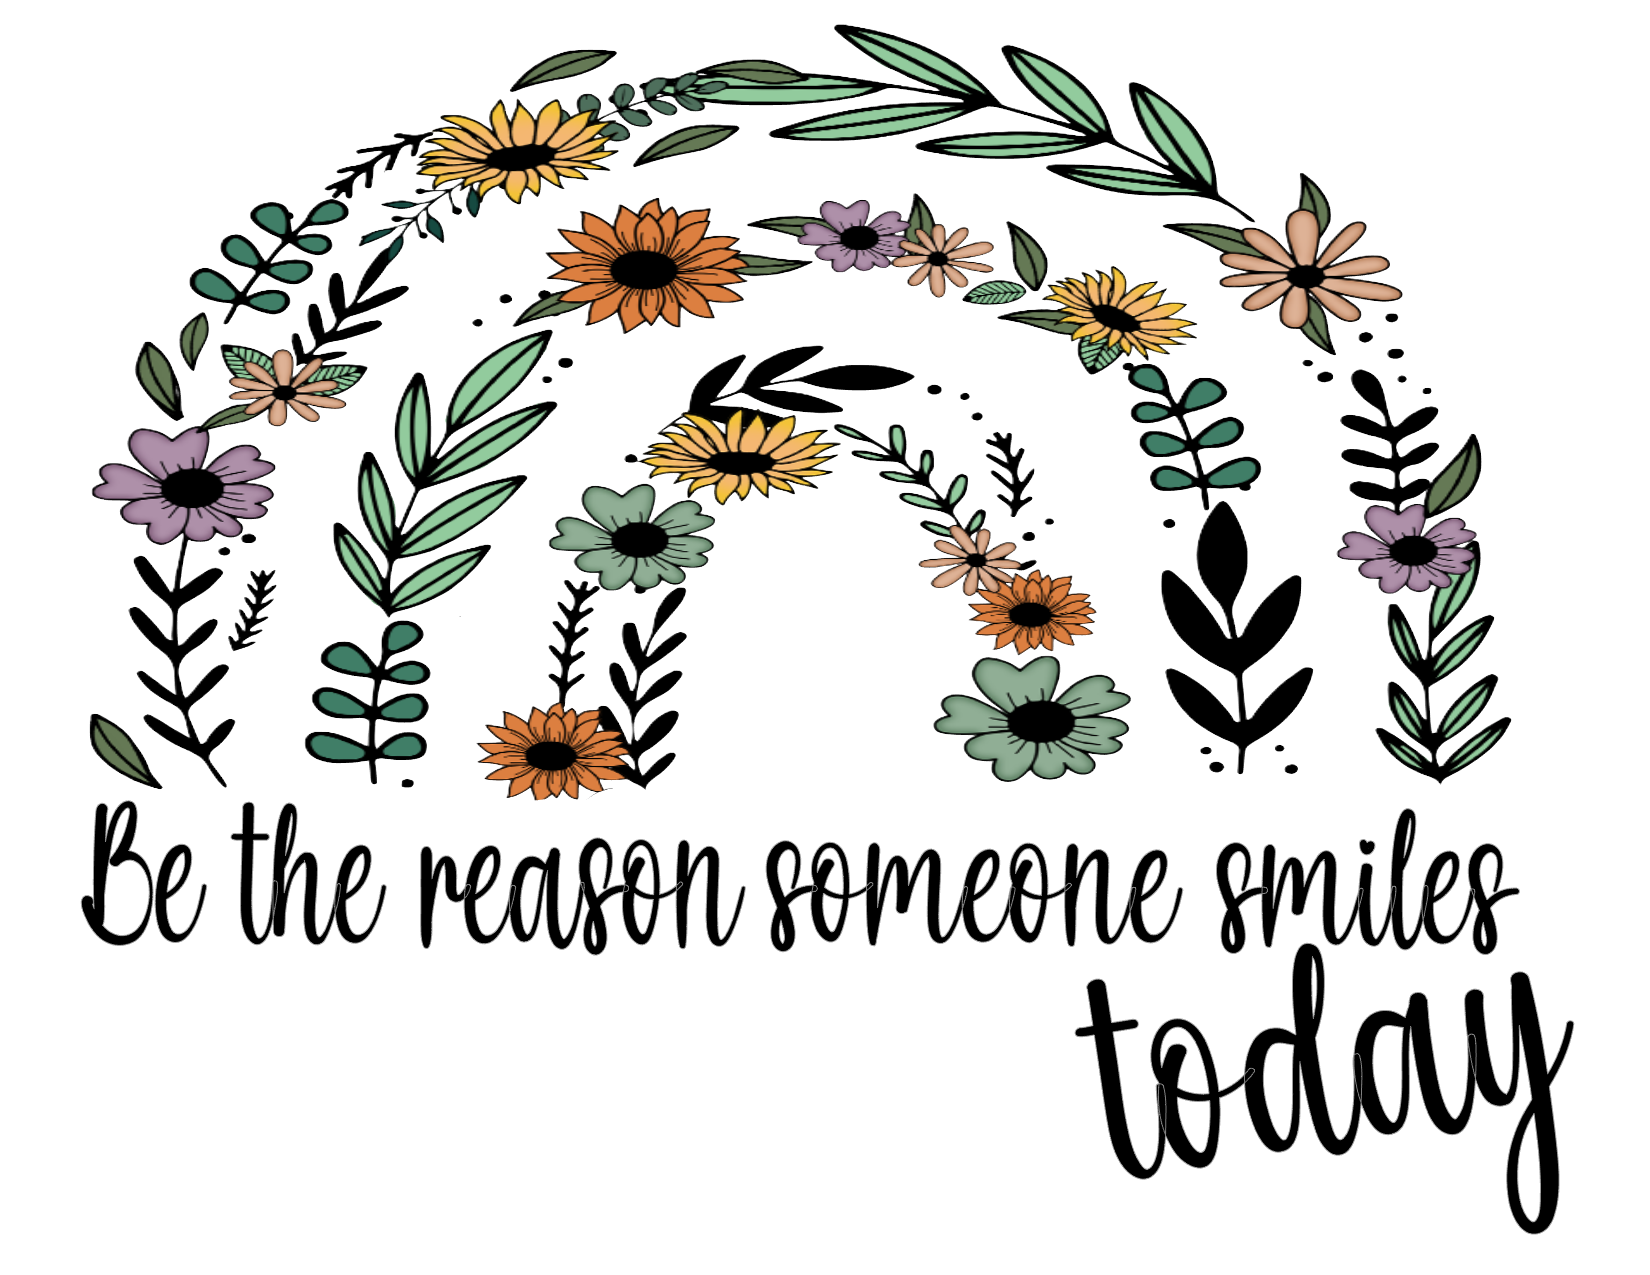 #13 Be the reason someone smiles today